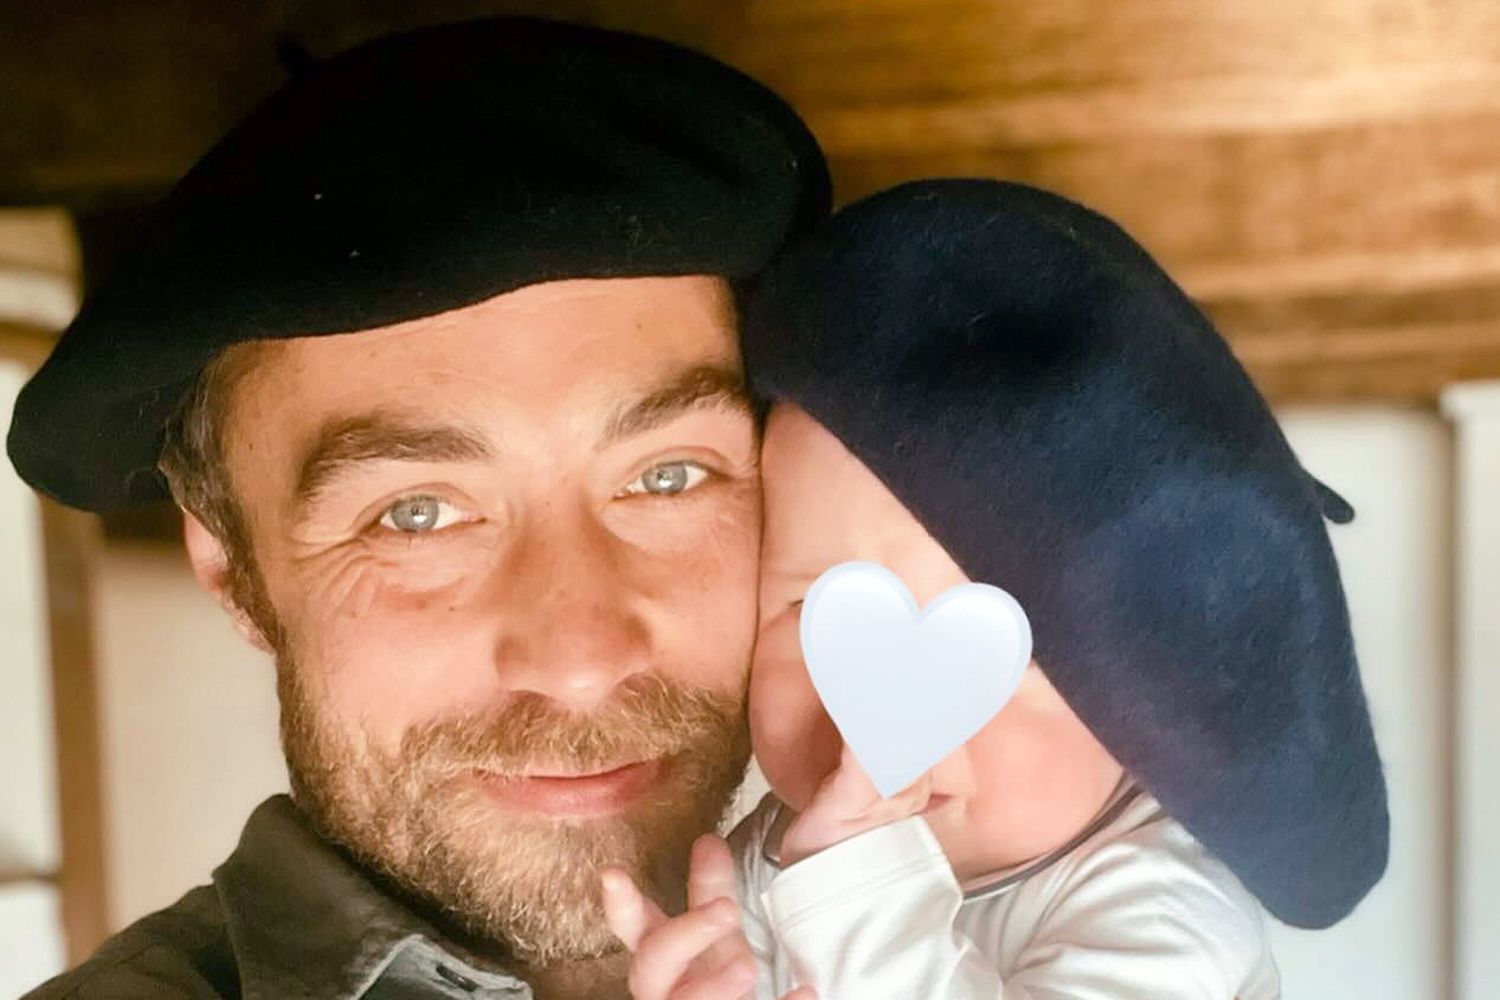 Kate Middleton younger brother, James Middleton Celebrates First Birthday as a Dad with a New Photo Twinning with Baby Inigo